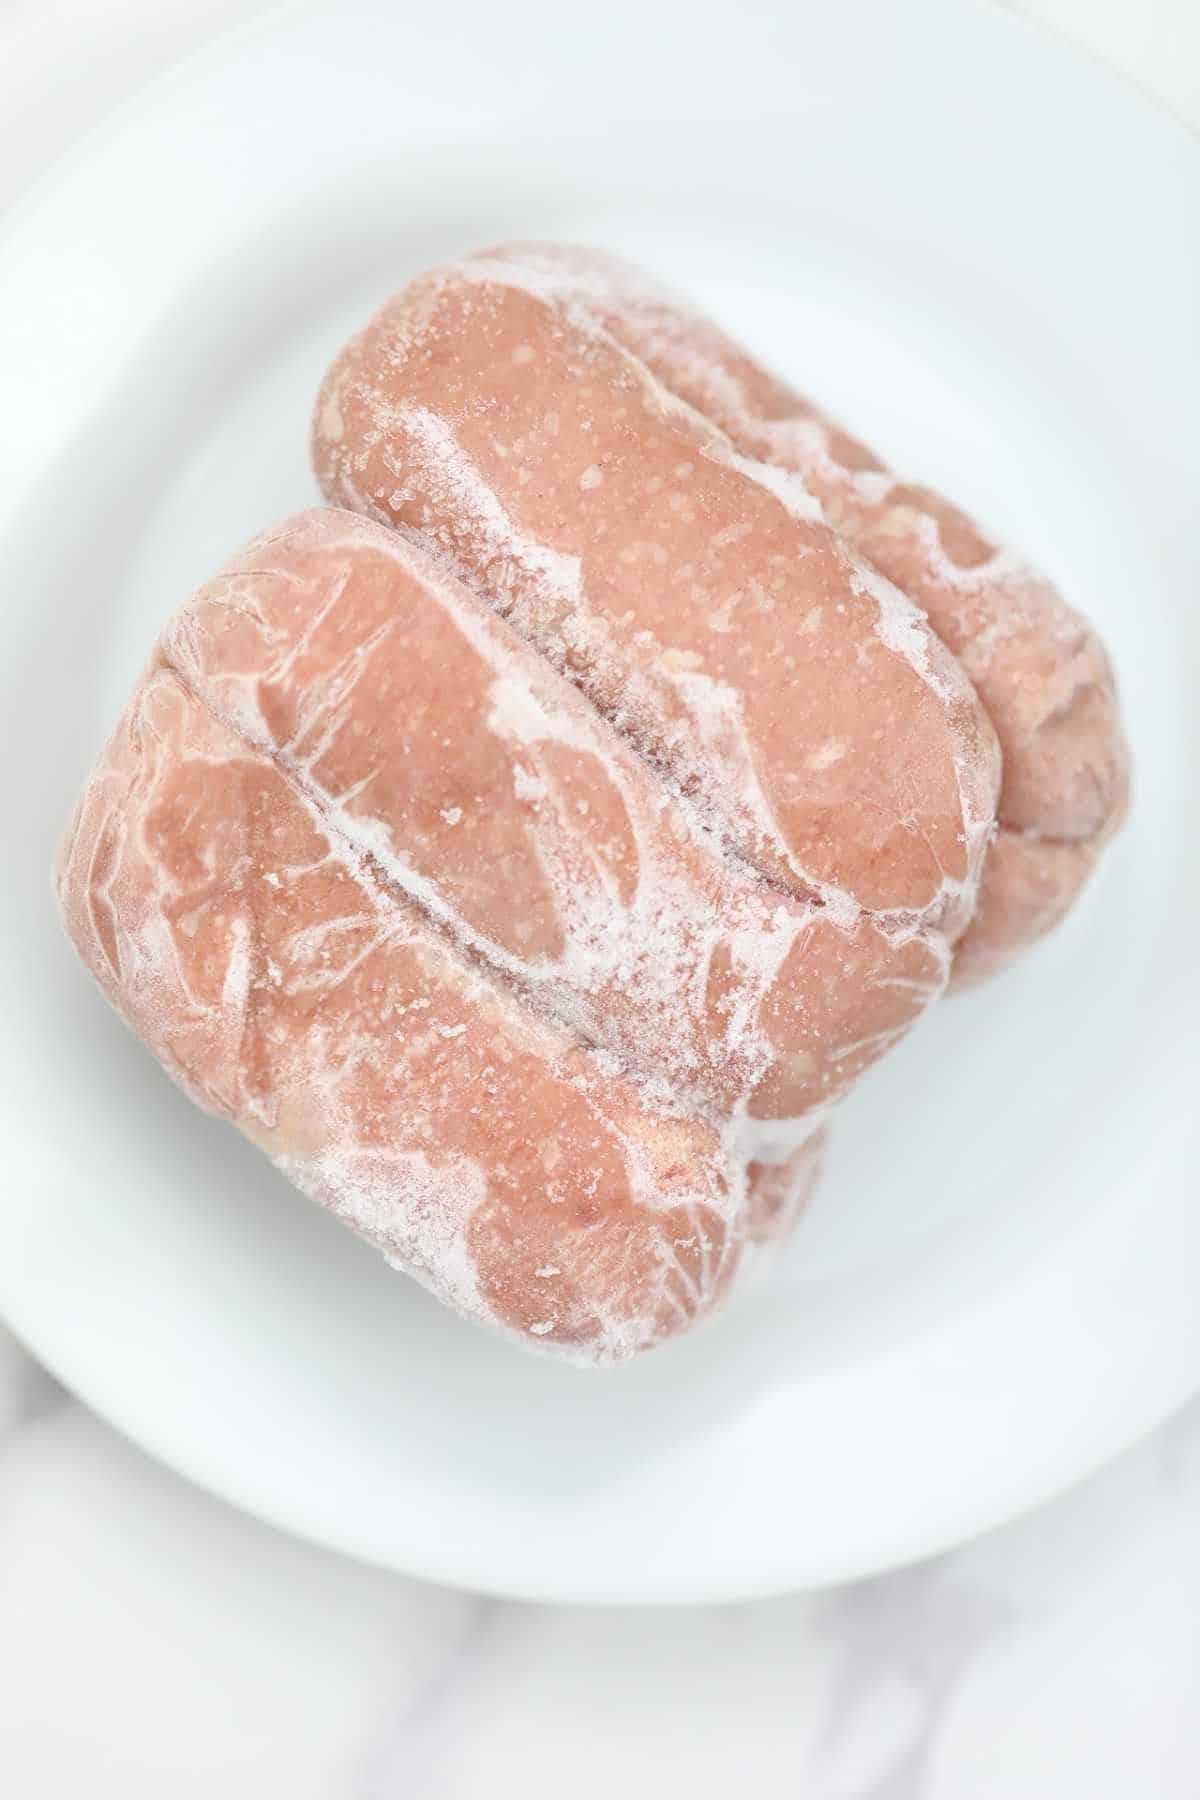 raw frozen sausages on a plate.